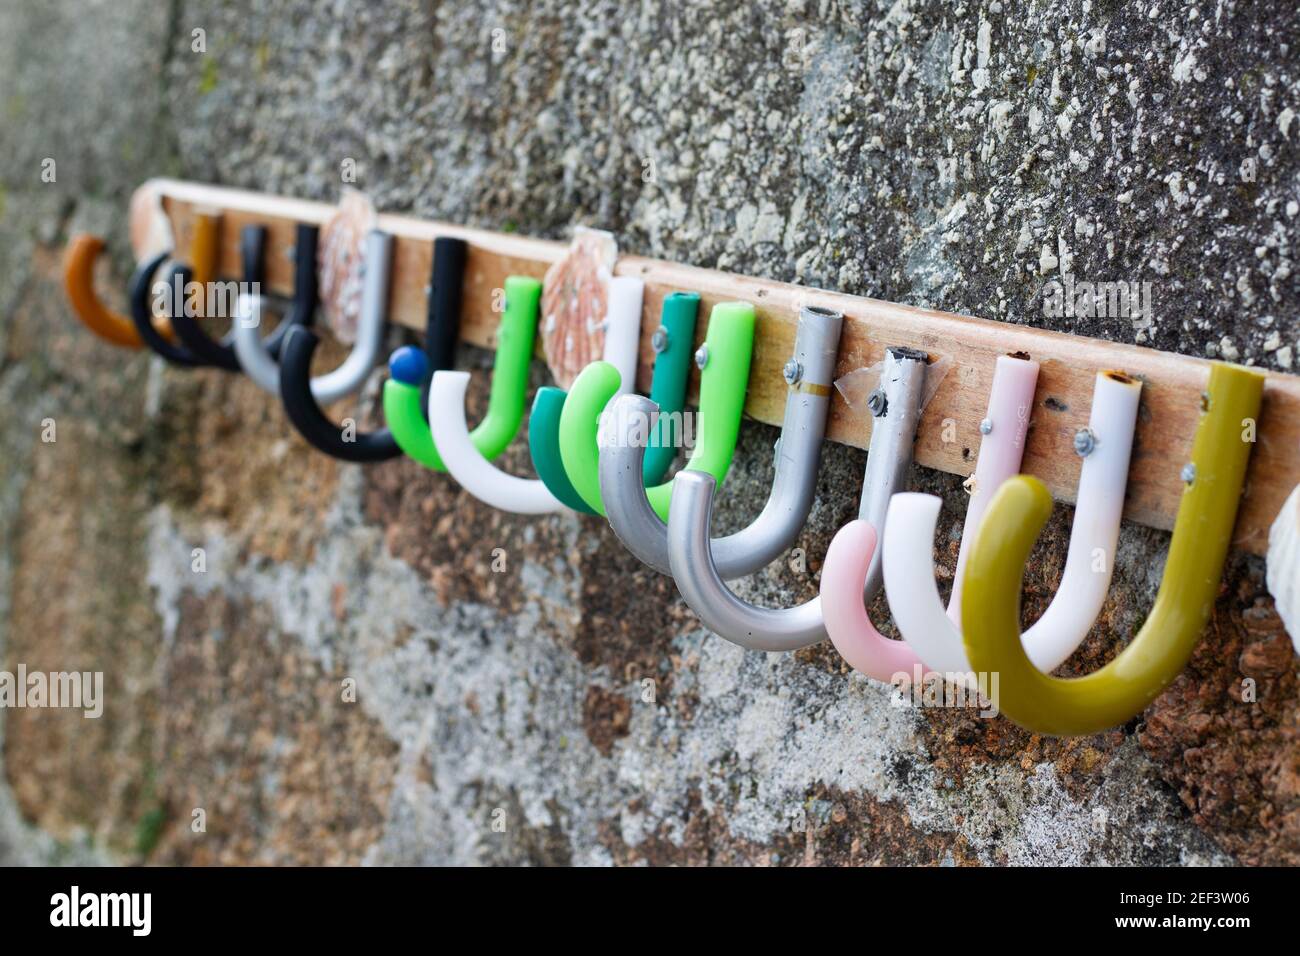 clothes hanger made up of different colored umbrella handles placed on the entrance wall to a beach Stock Photo